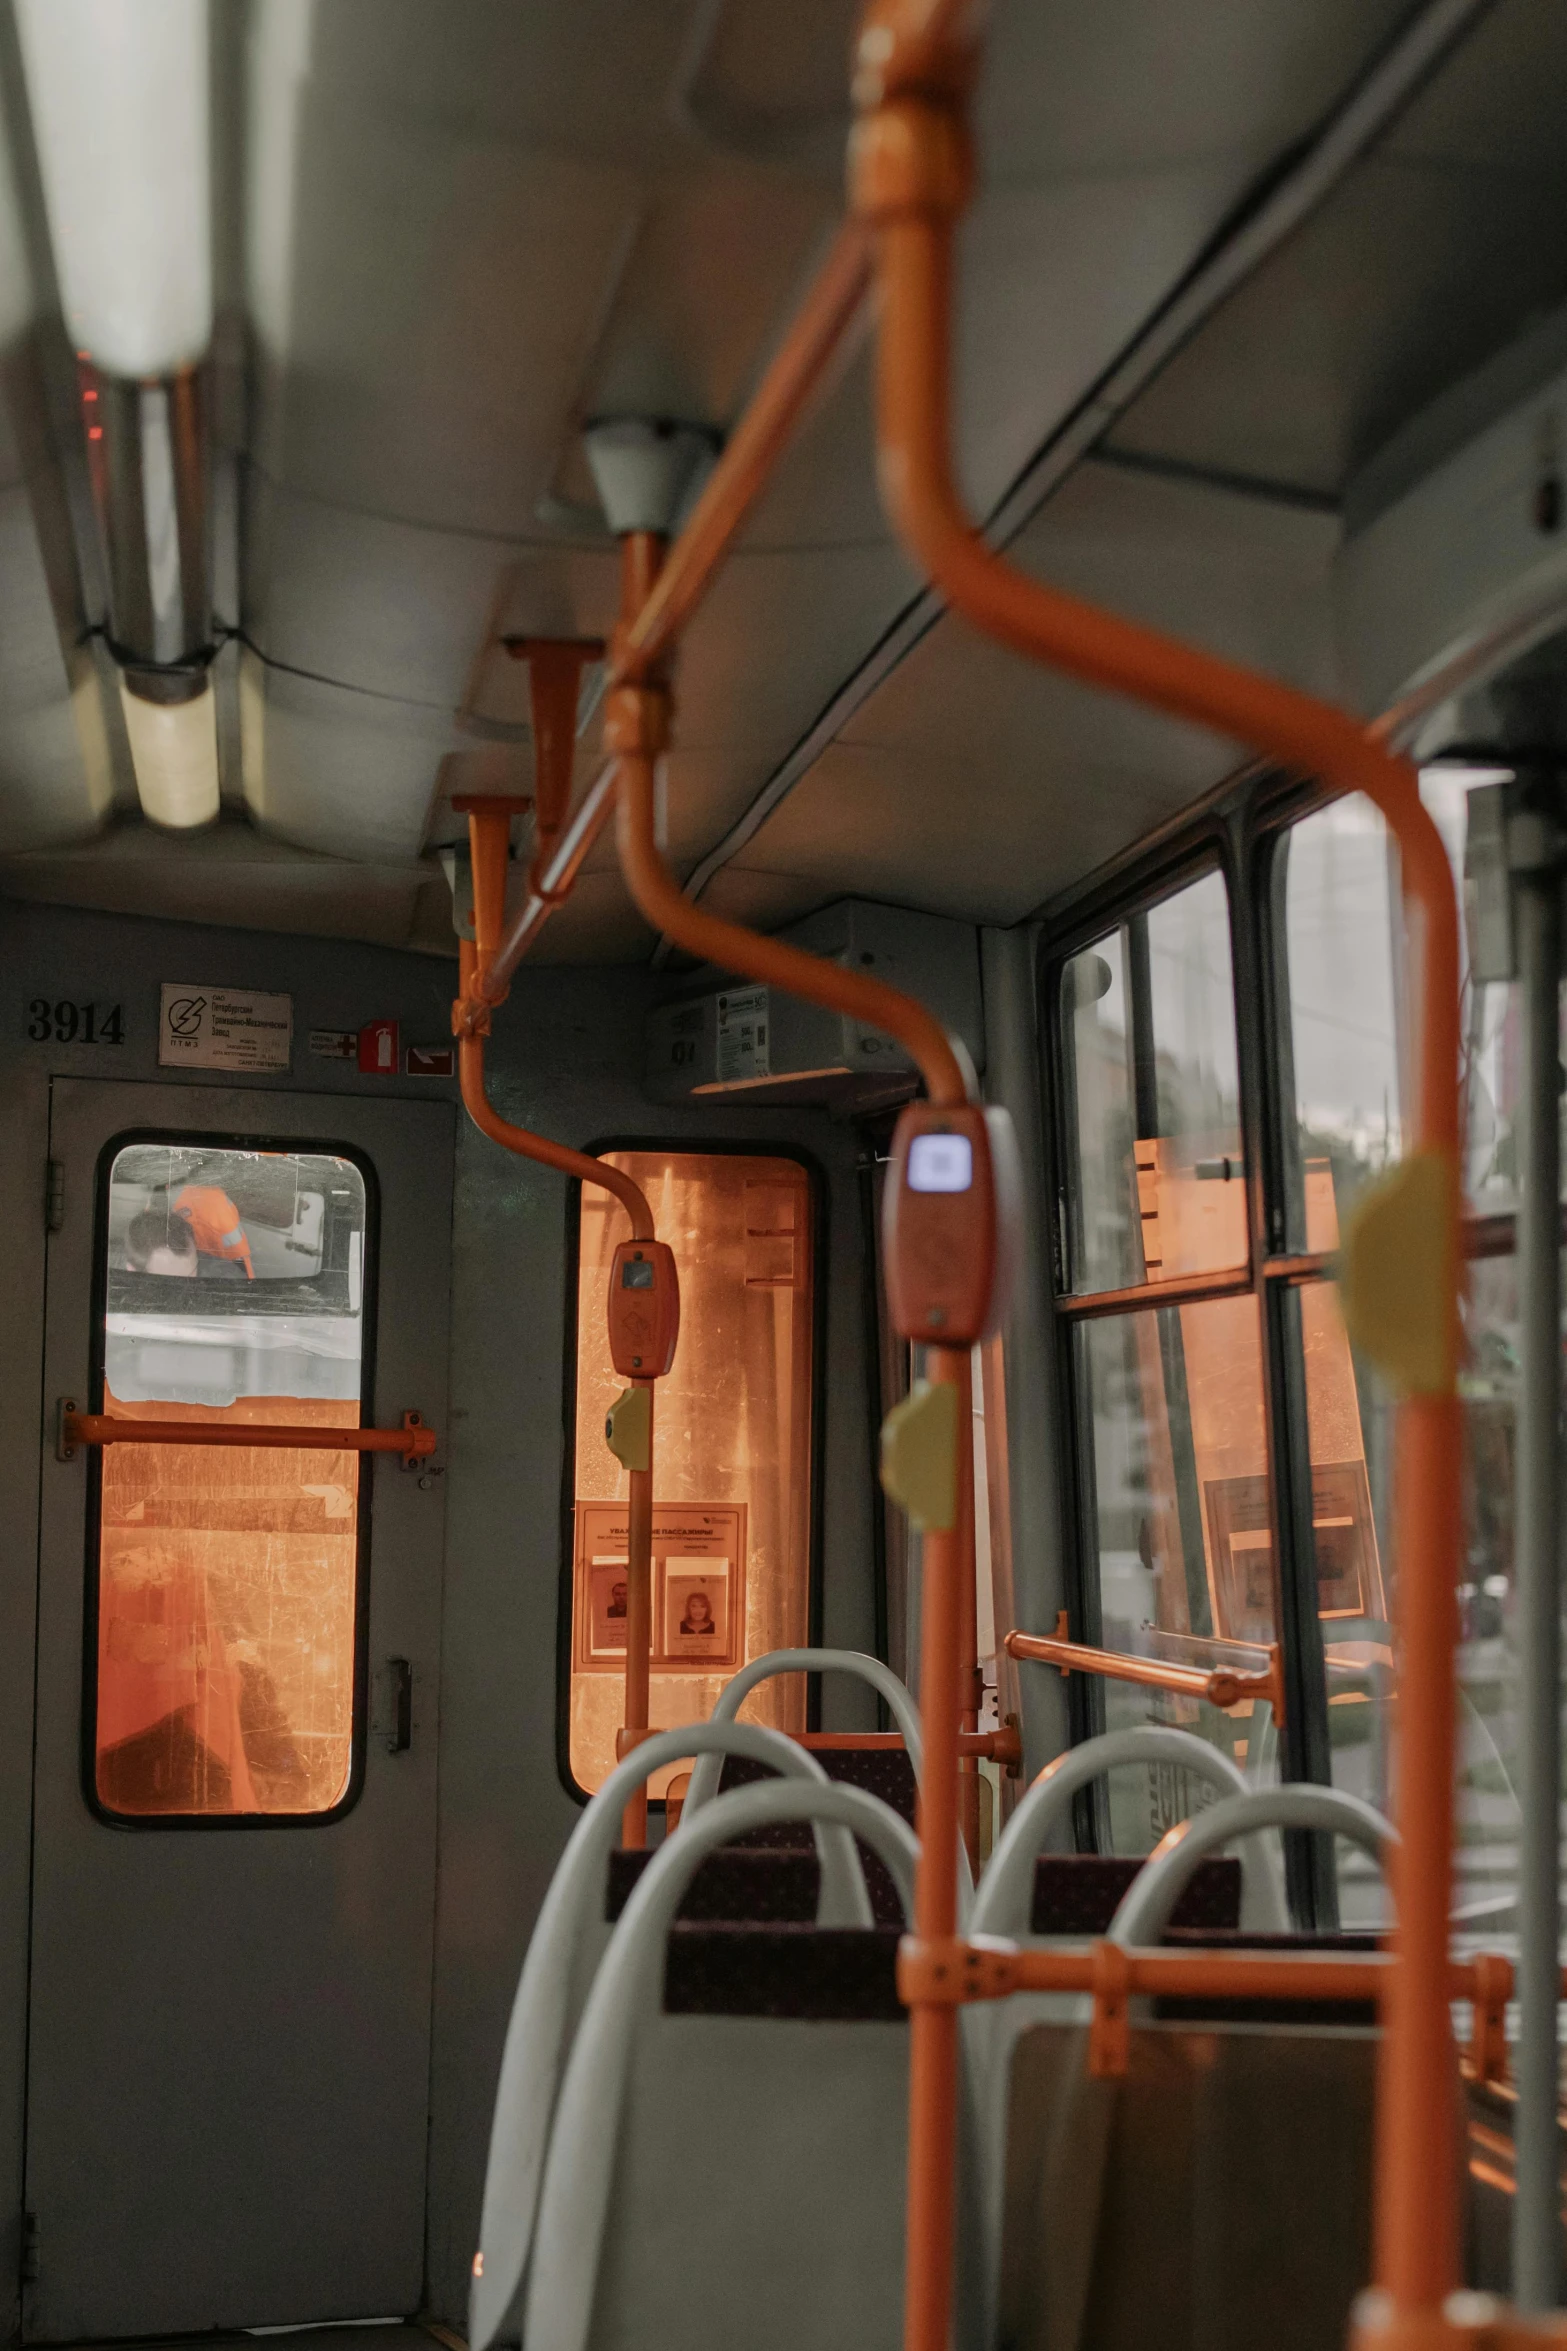 there is no image here to provide a caption for, by Attila Meszlenyi, orange line, copper, interior shot, controls